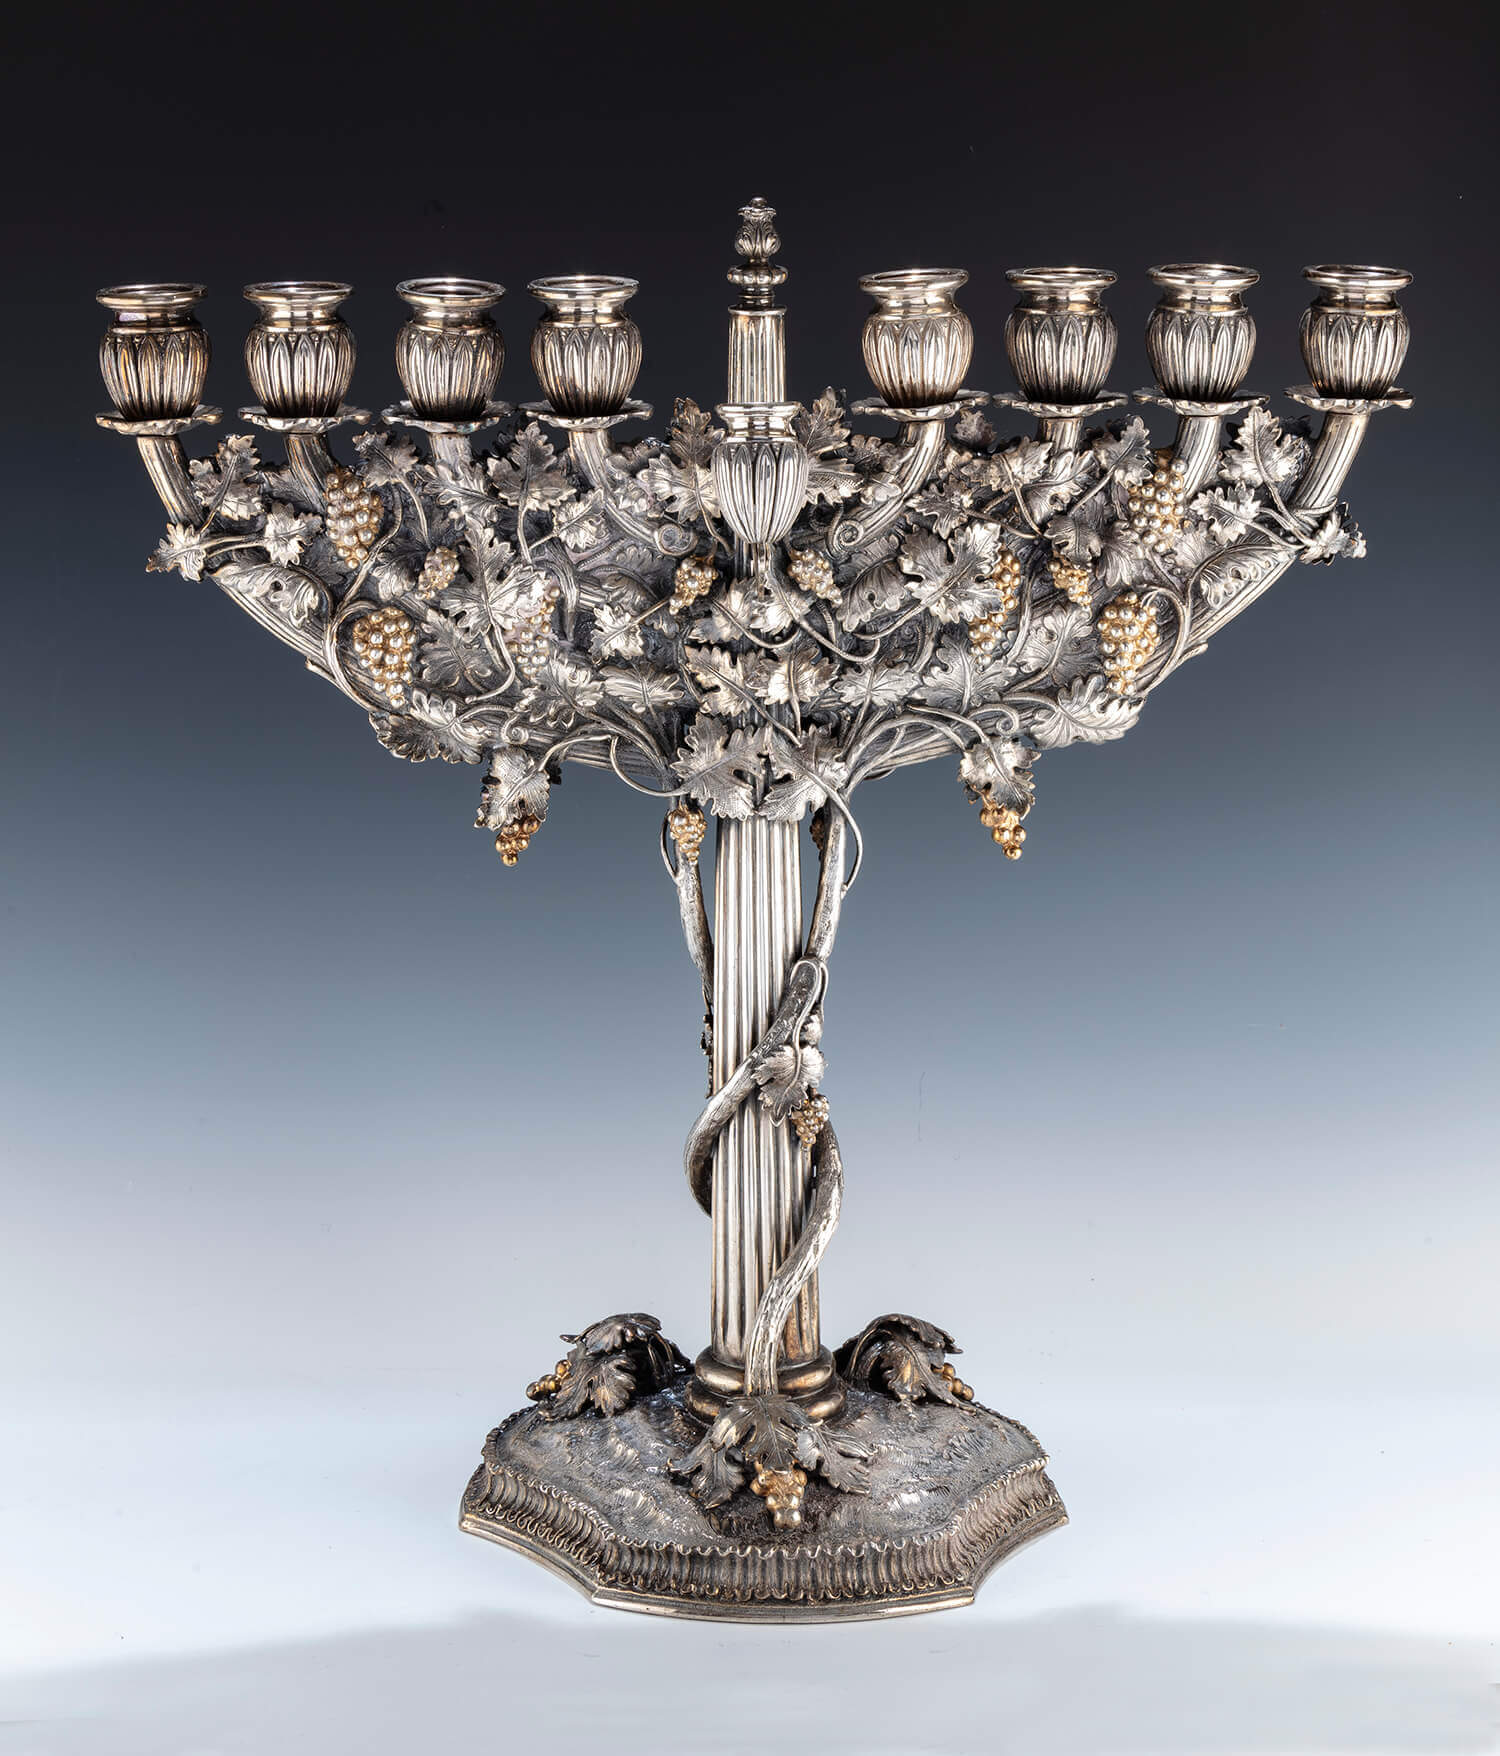 175. A MONUMENTAL STERLING SILVER MENORAH BY GRAND STERLING